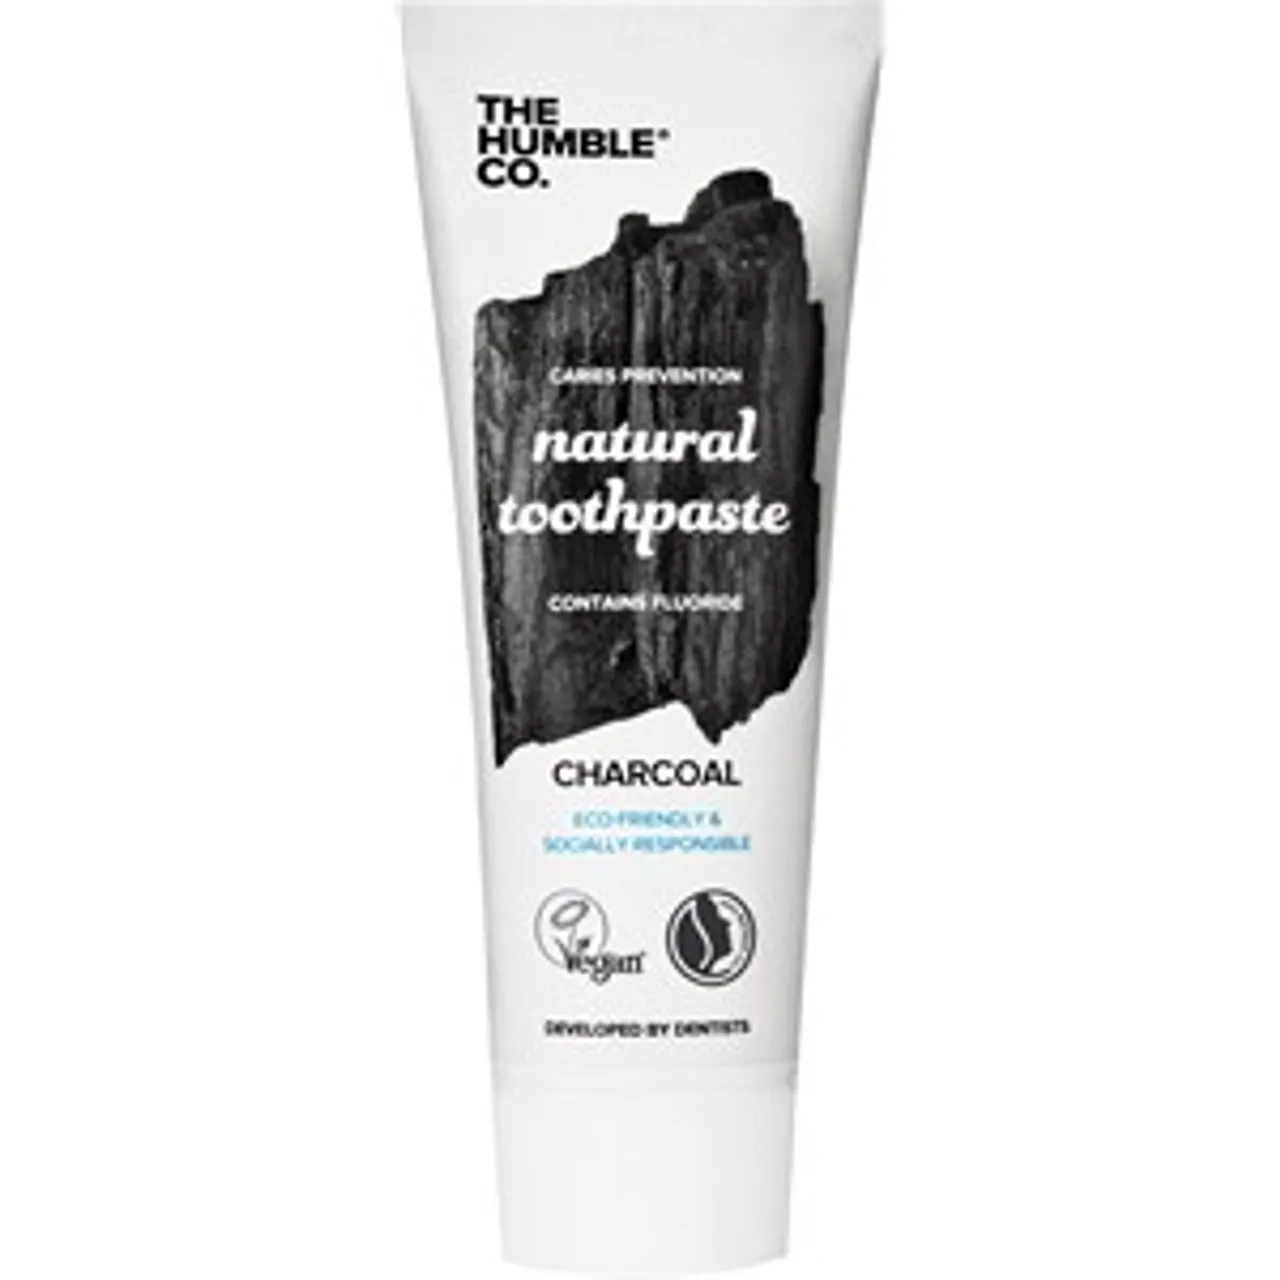 The Humble Co. Natural Toothpaste Charcoal 2 75 ml